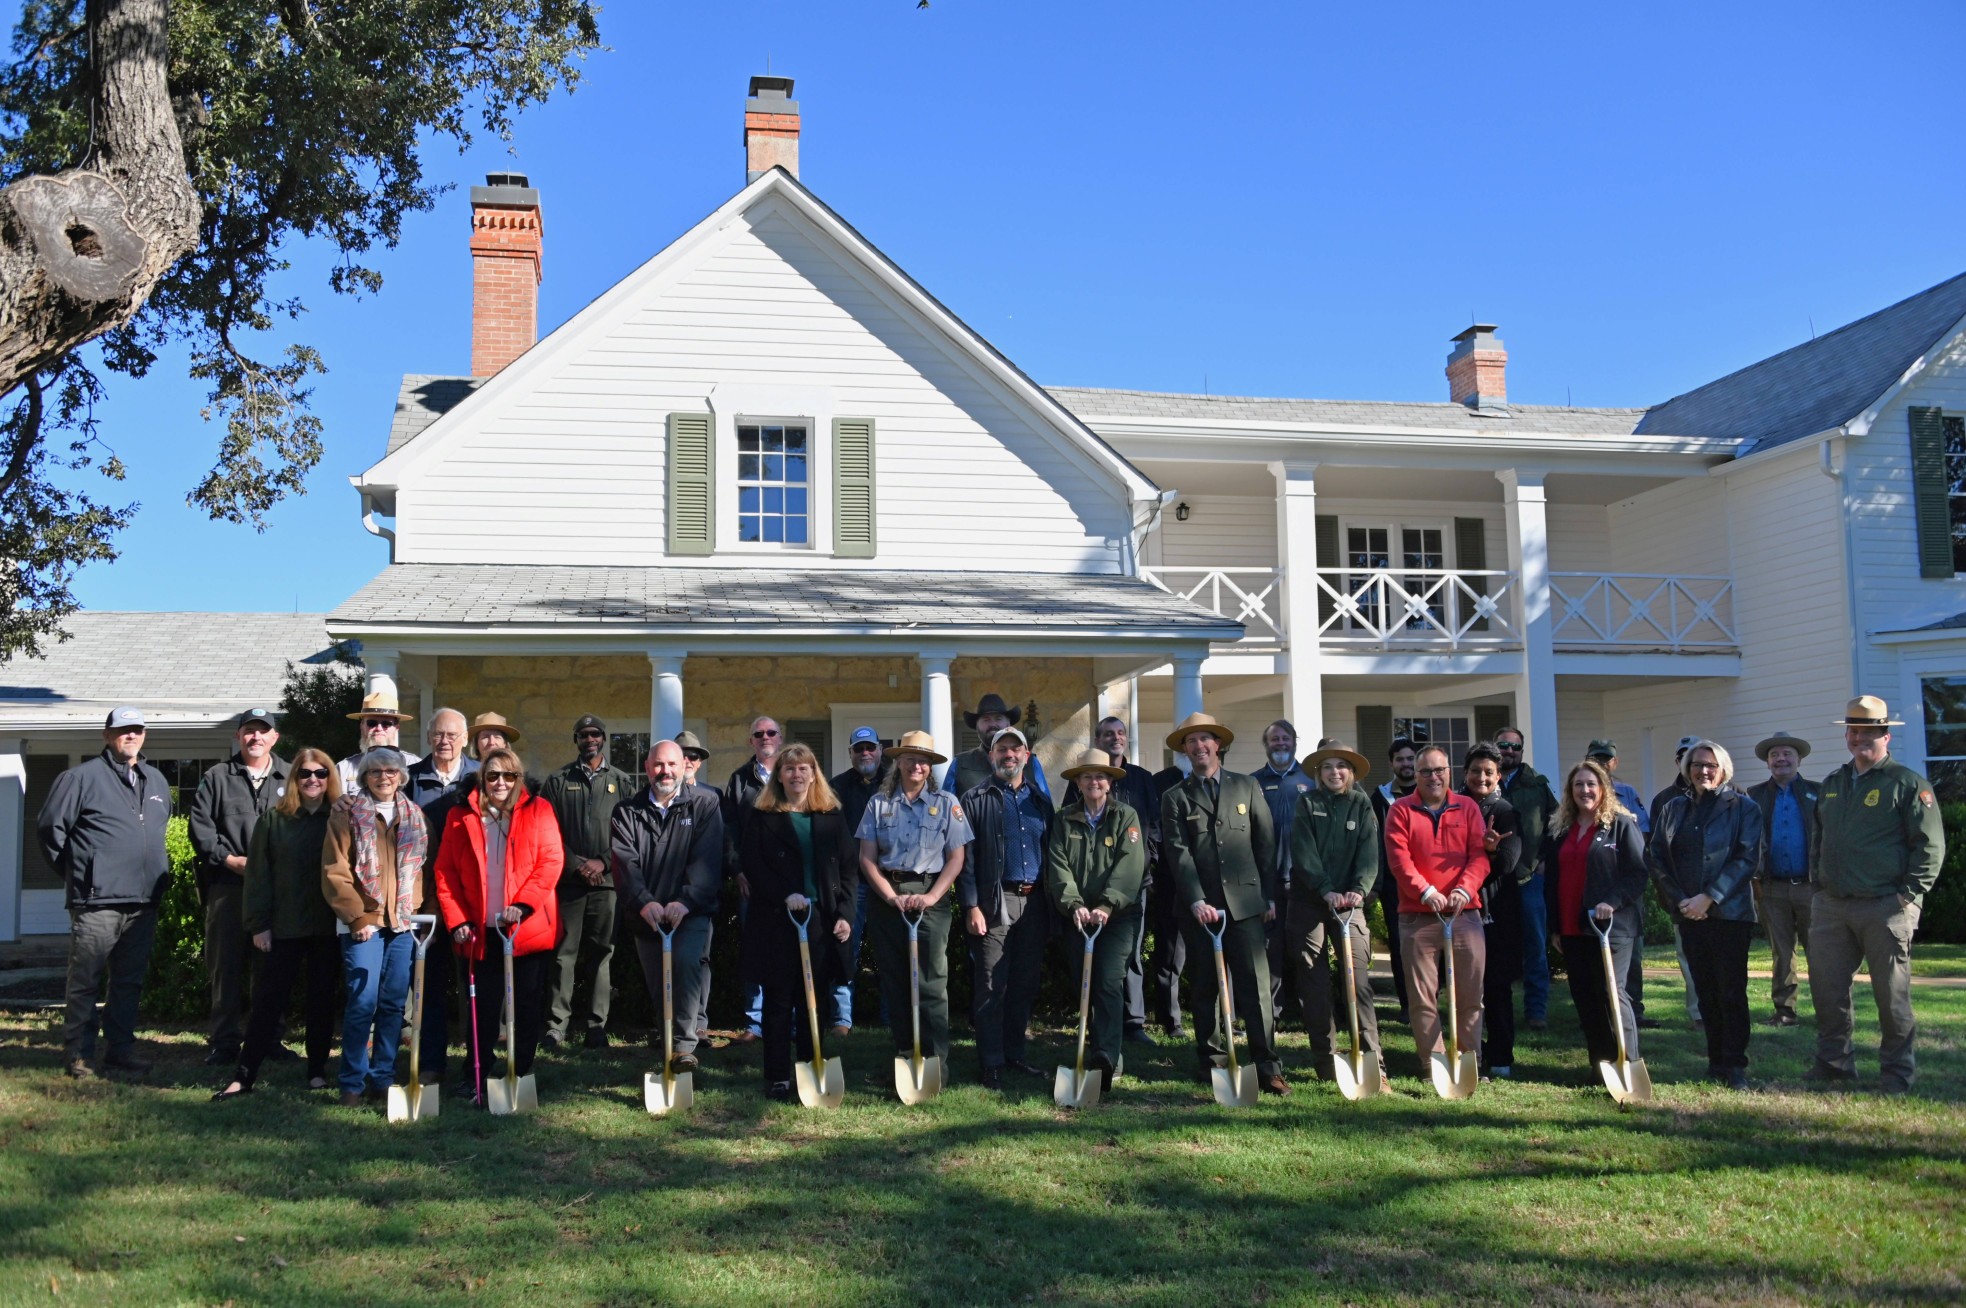 Group of people holding shovels pose together in front of newly renovated house.